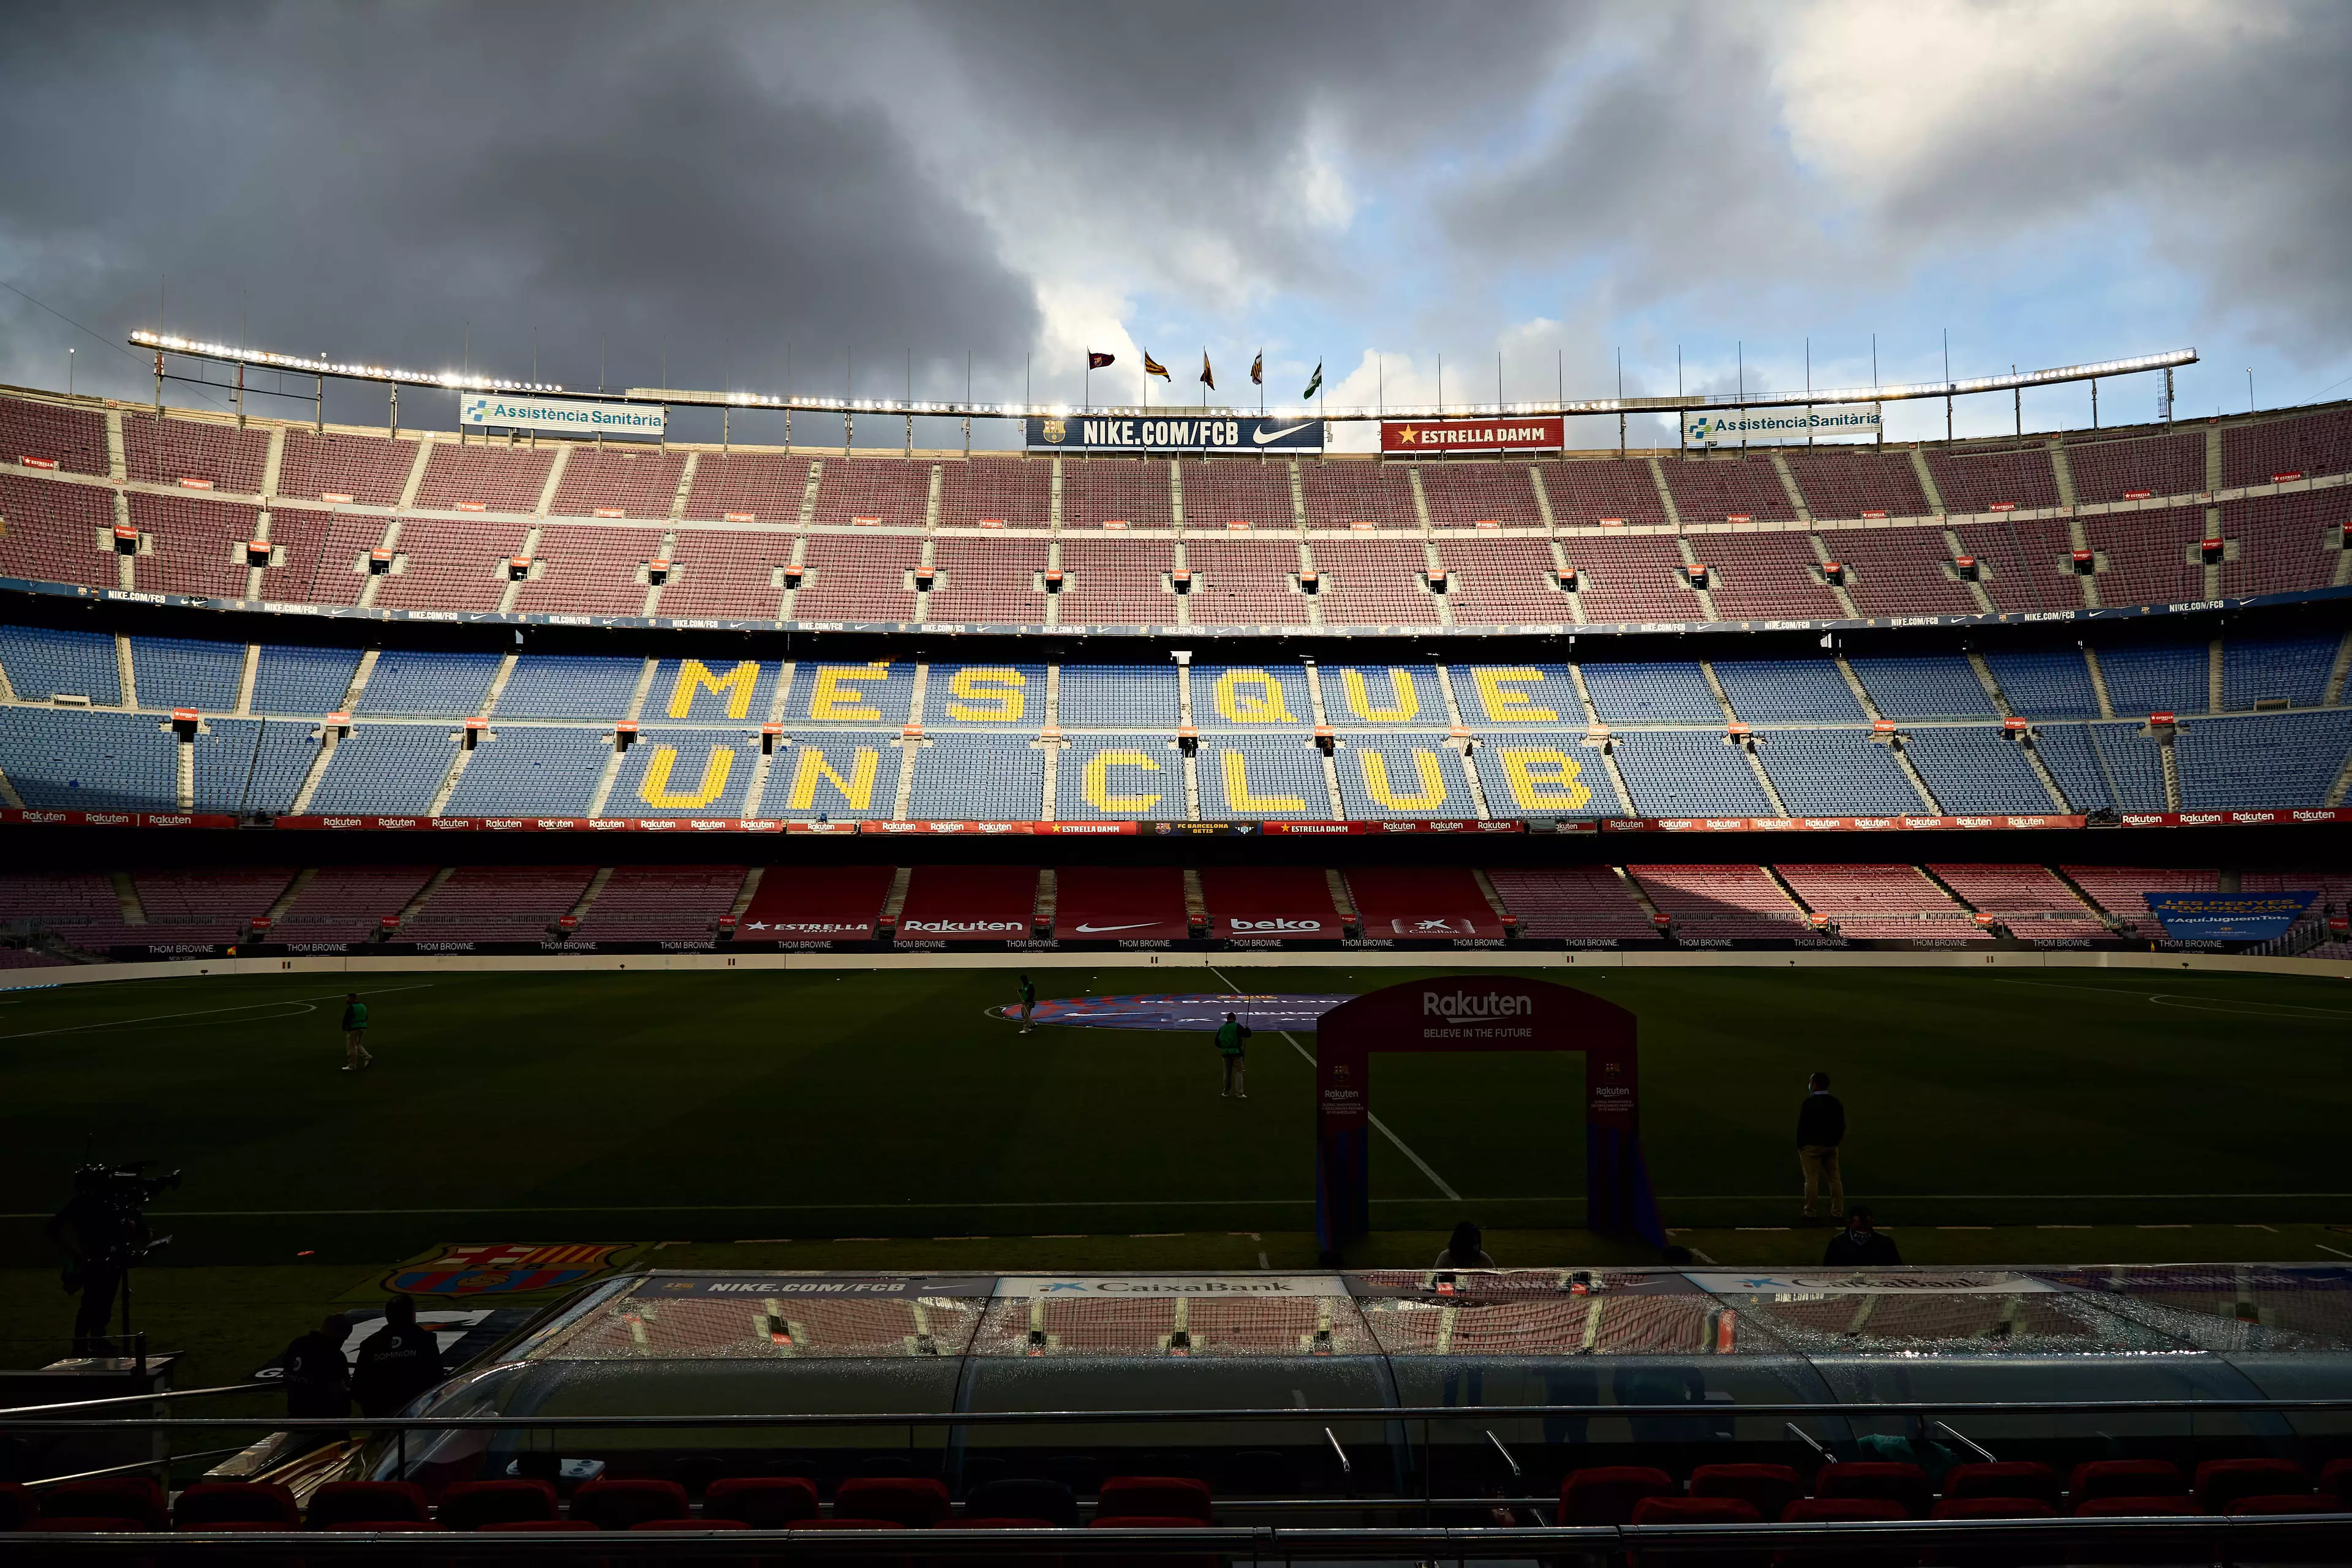 The Nou Camp could soon be named after the man who's scored most goals inside. Image: PA Images